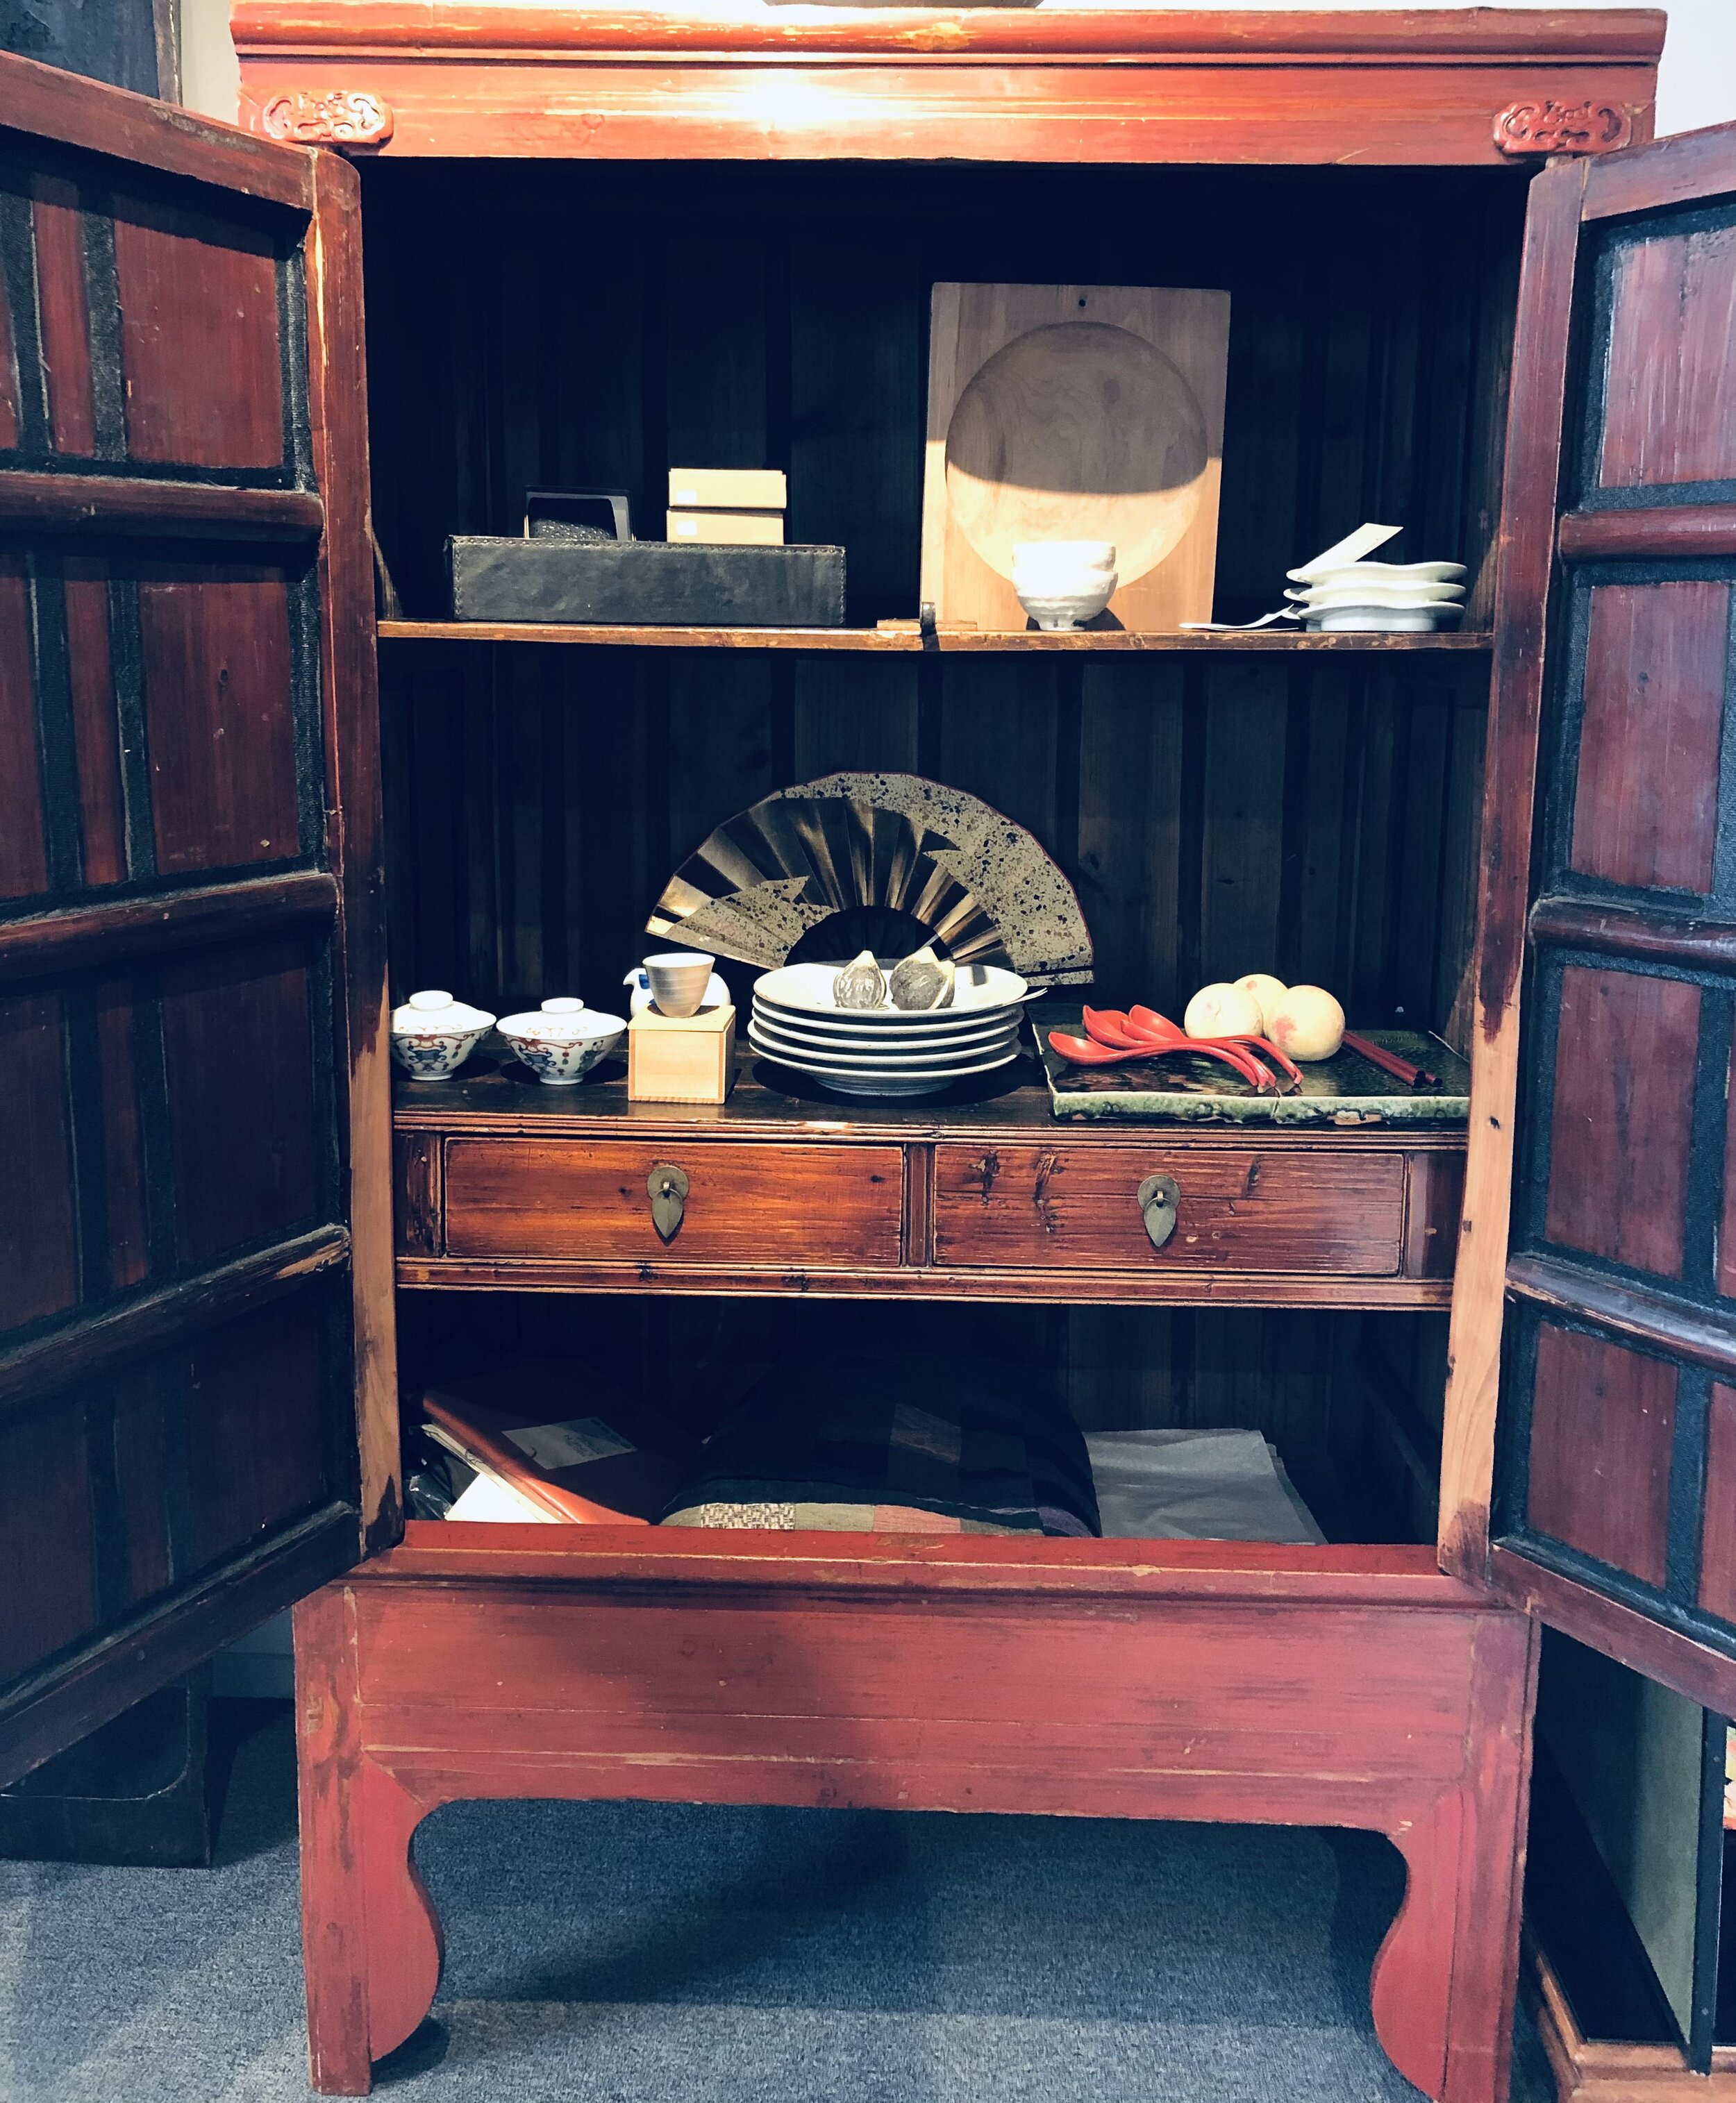 Priceless: Antique Japanese & Chinese Furniture — ASIATICA